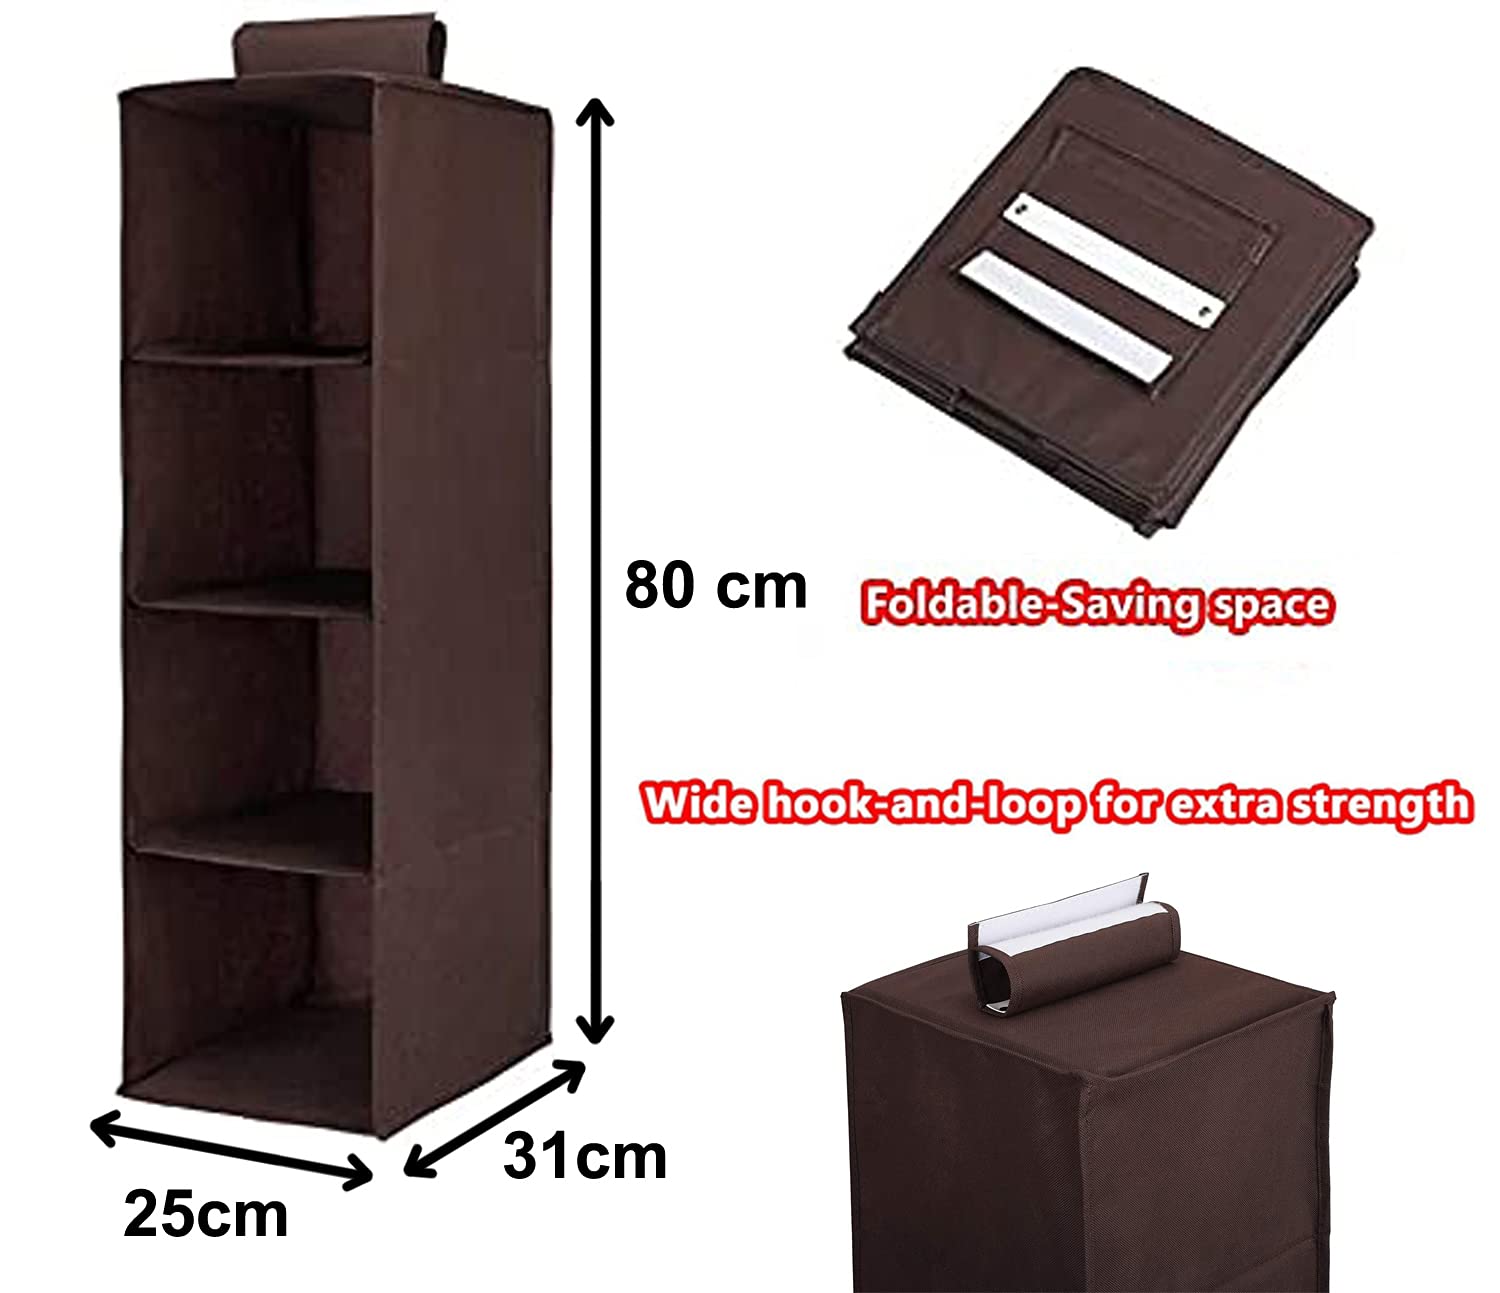 Kuber Industries 4 Shelf Closet/ Wardrobe Hanging Organizer|Shoes Storage Cupboard|Non Wovan Foldable With Universal Fit|Size 31 x 25 x 80, Pack of 1 (Brown)